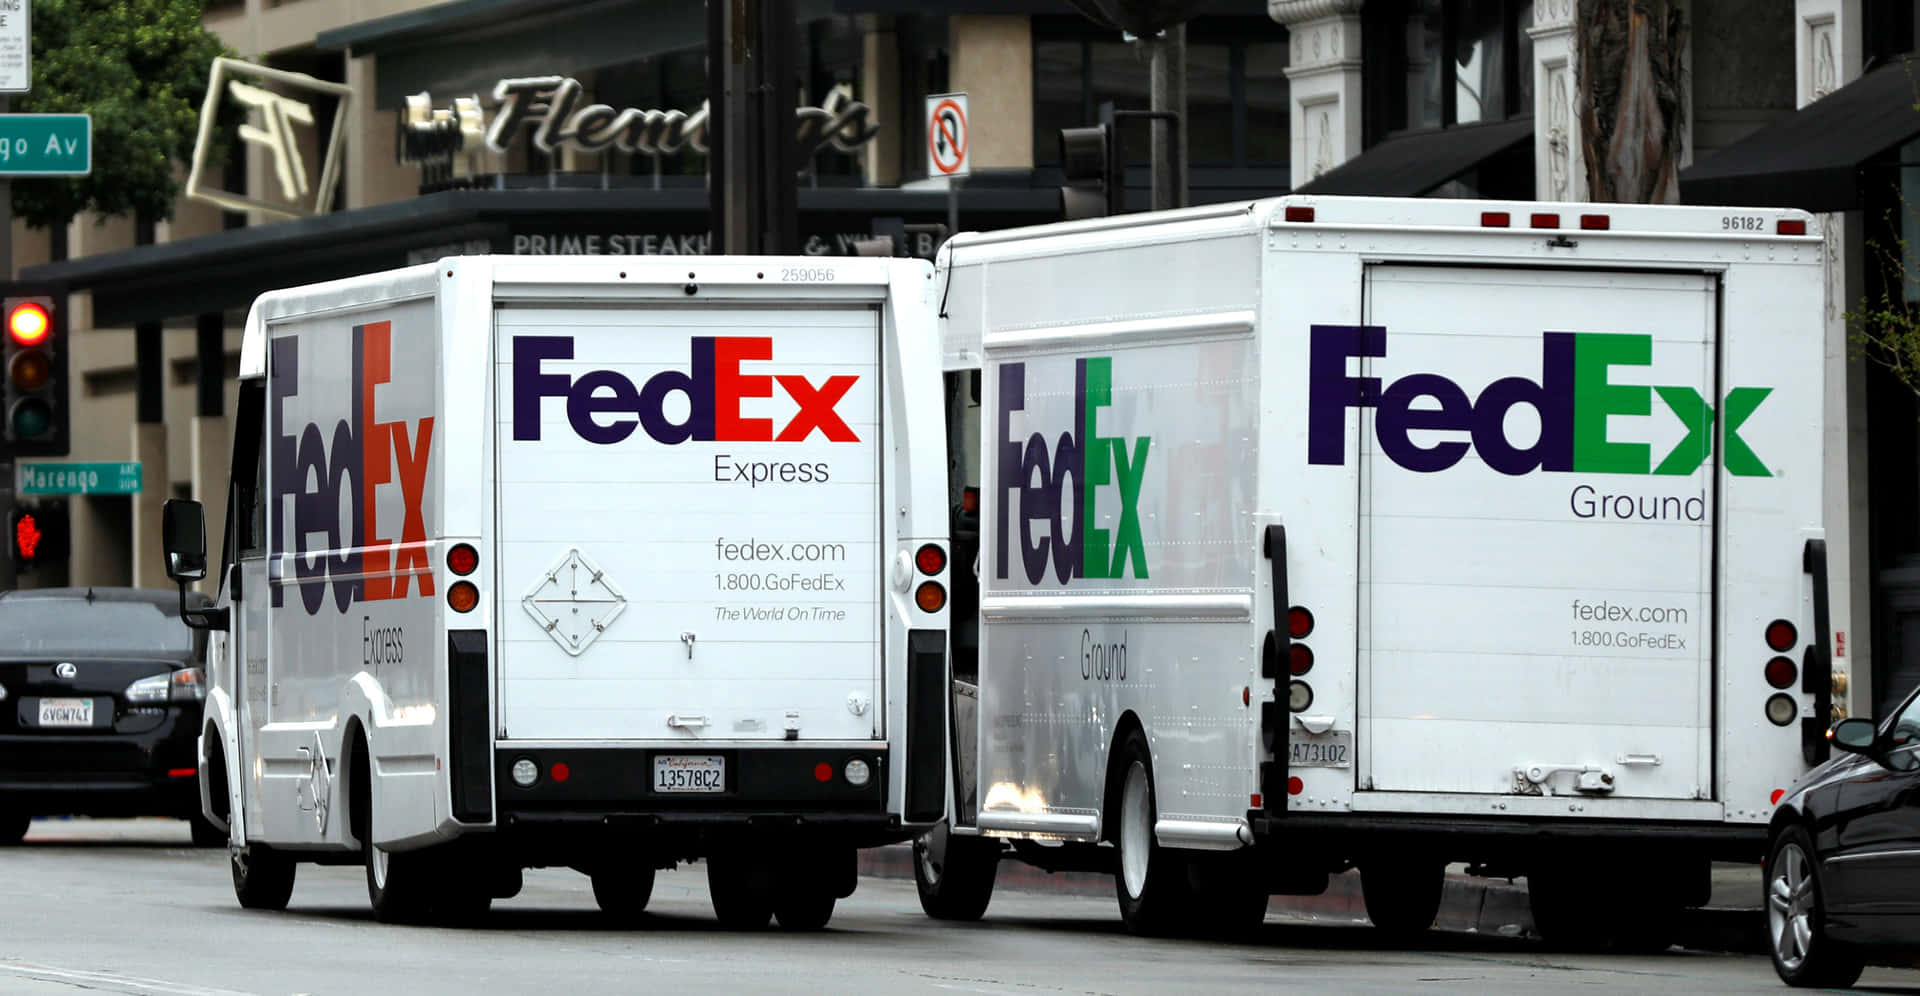 Fedex Delivers Speed and Reliability